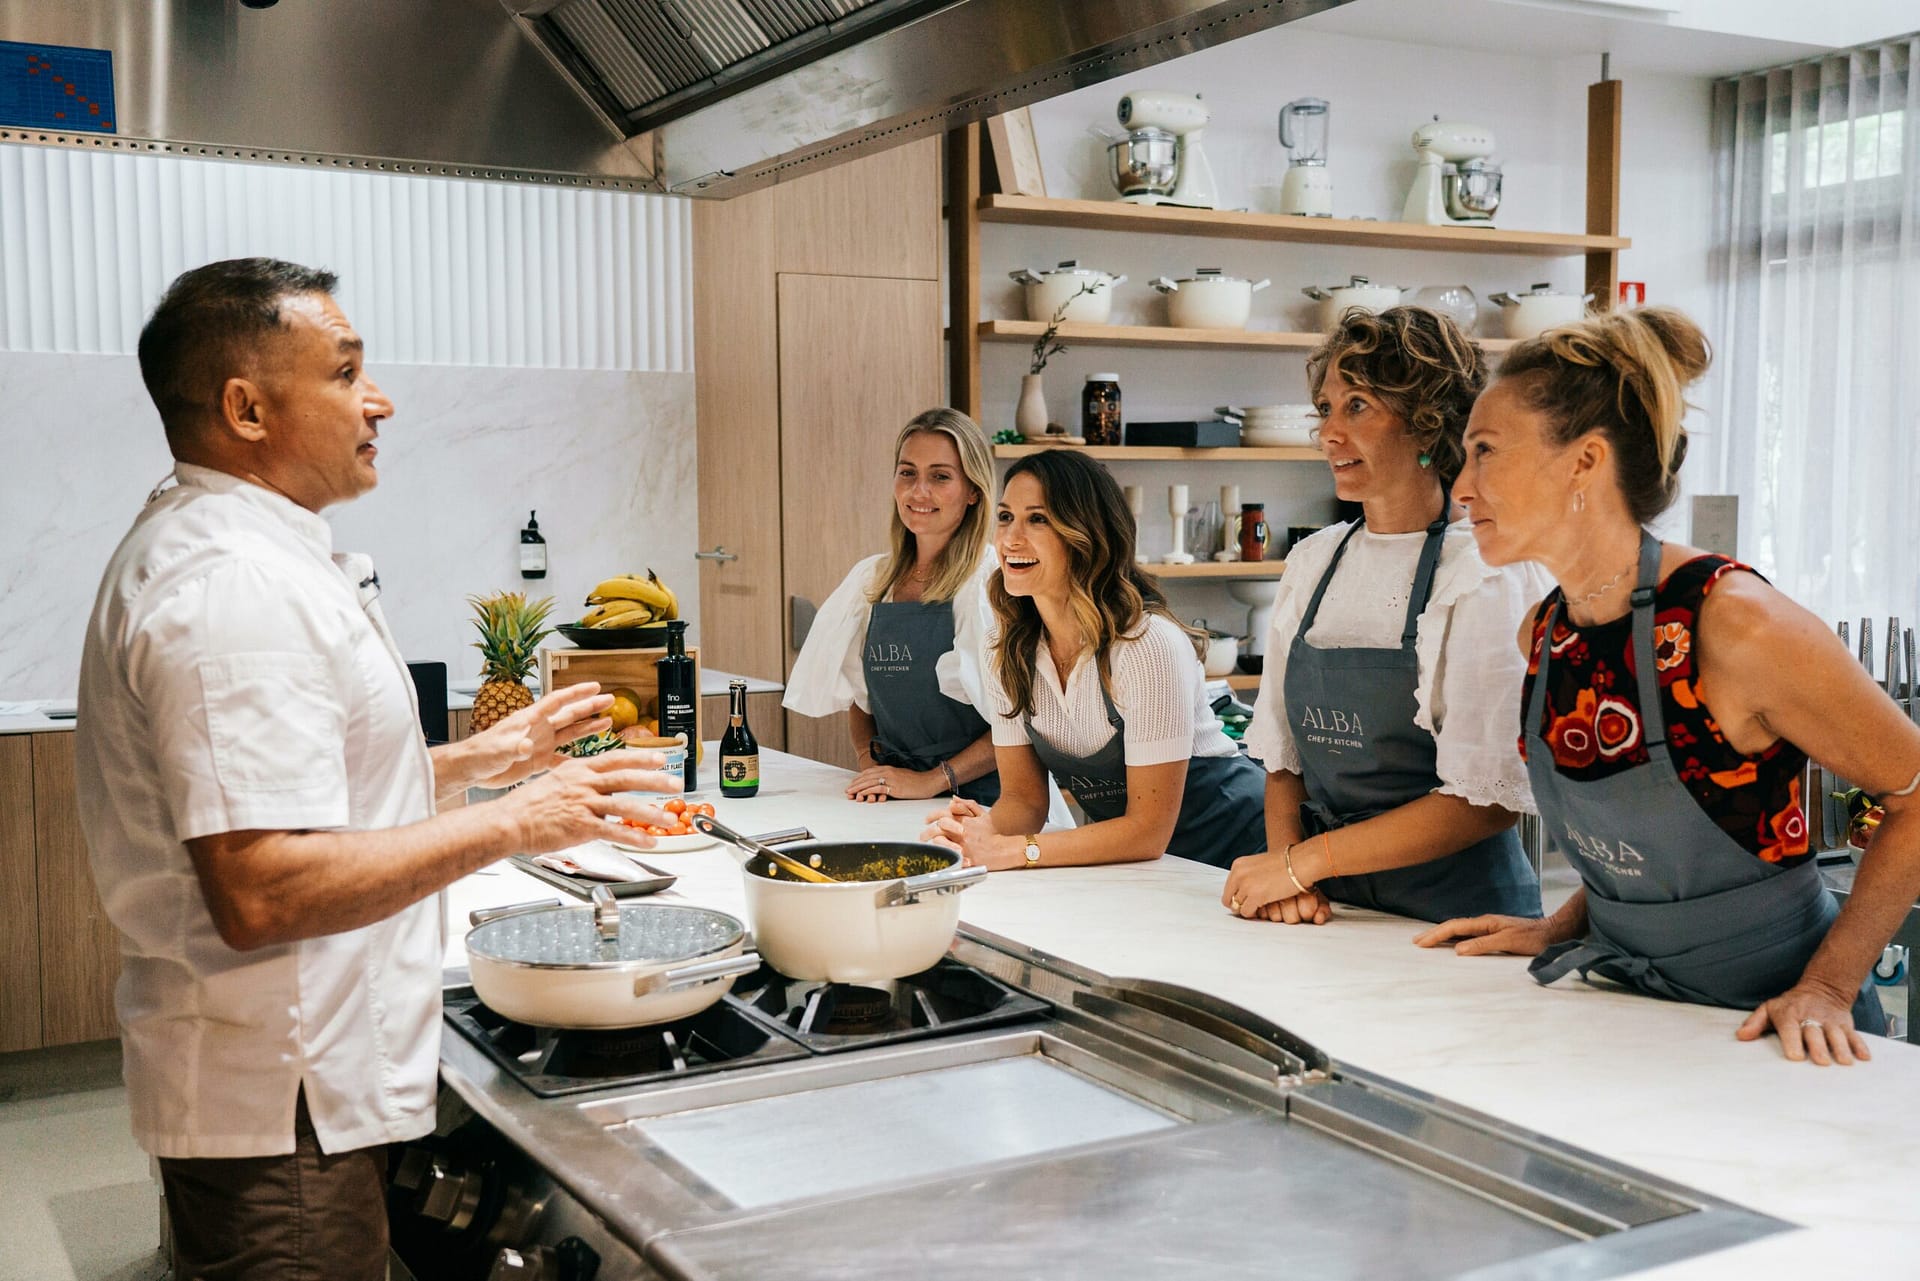 Alba Noosa – Private Team Cooking Class offer